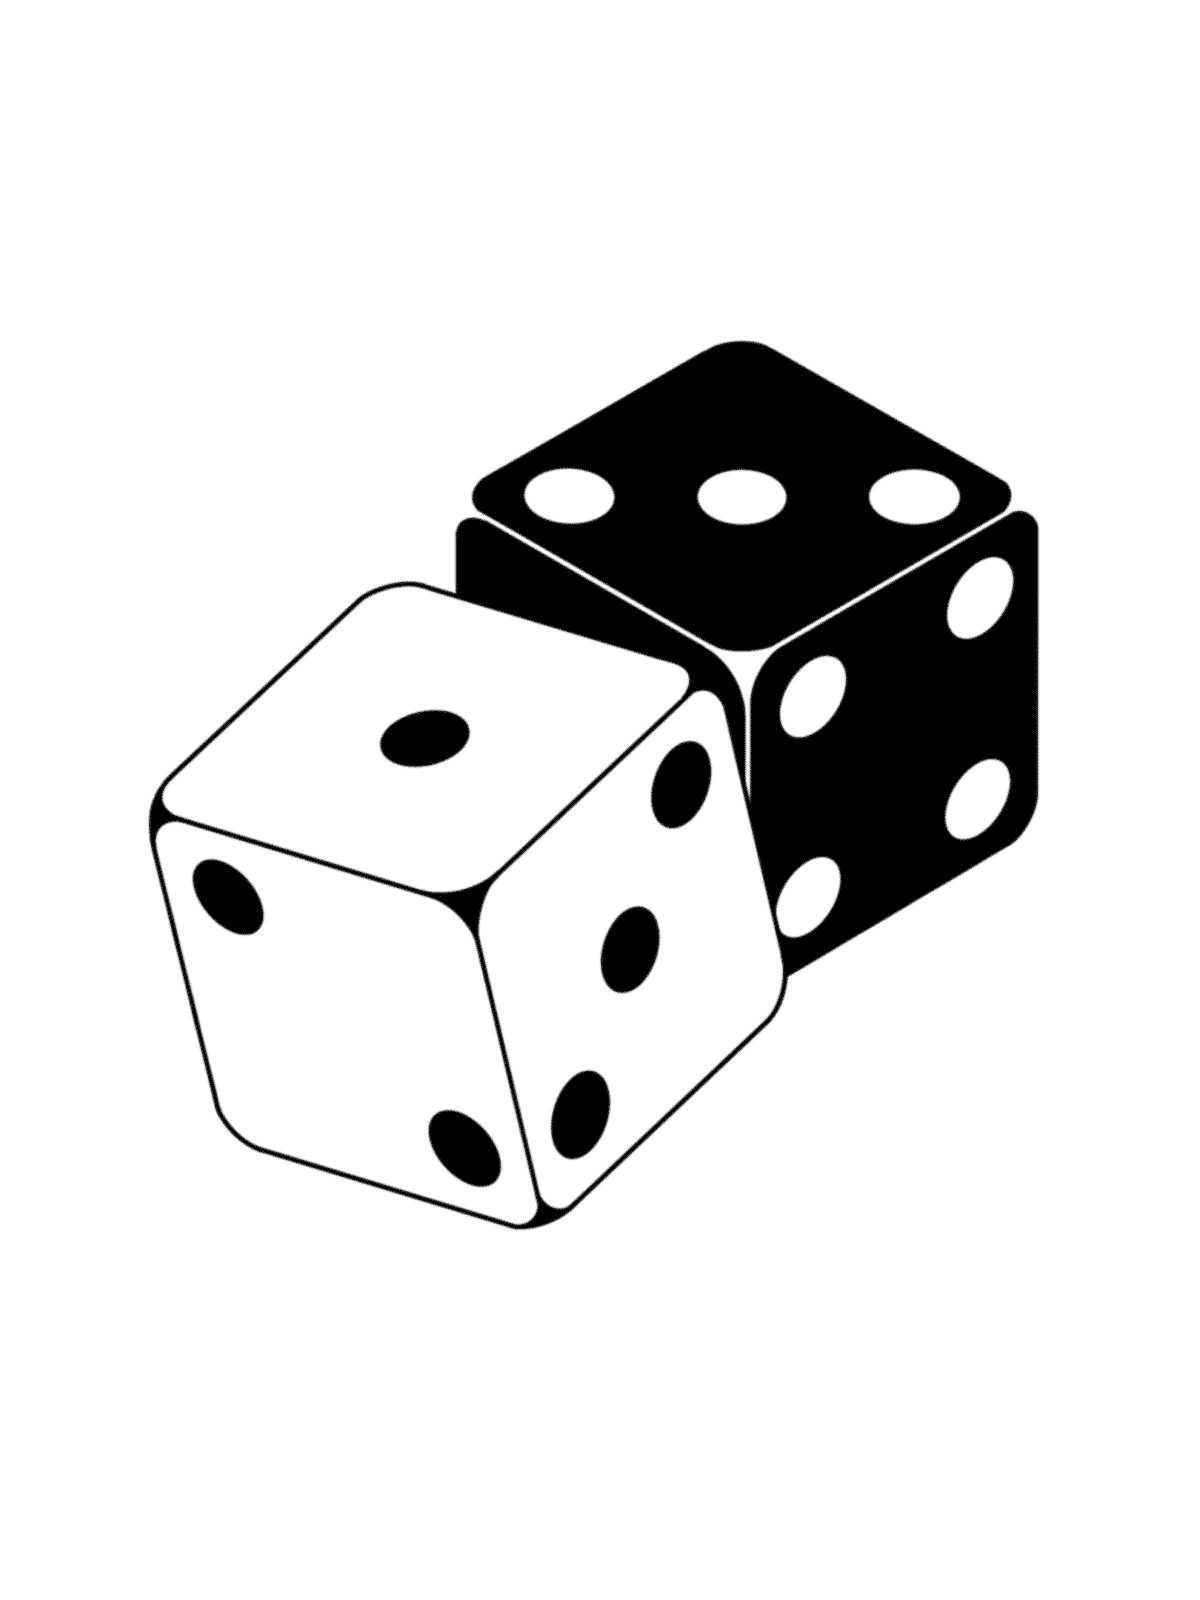 Ratchet Gold Art print dice spicy dicey black and white digital